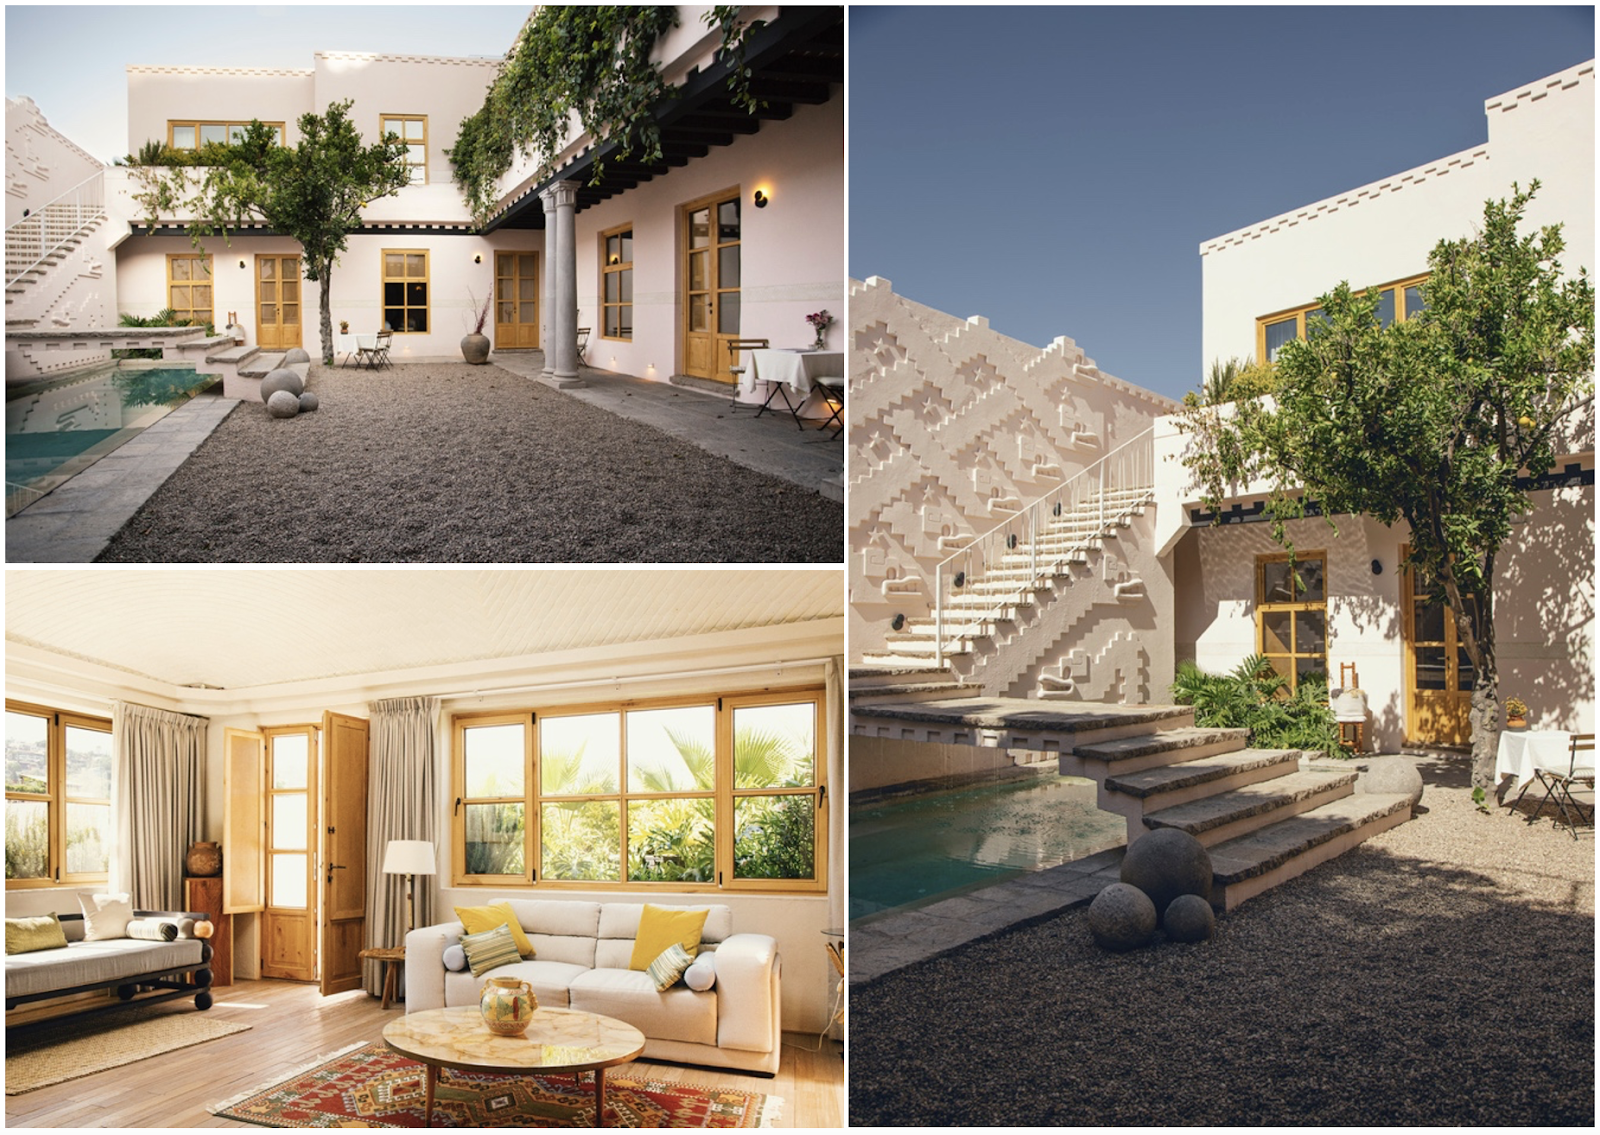 Photos of the interior and exterior of Hotel La Valise